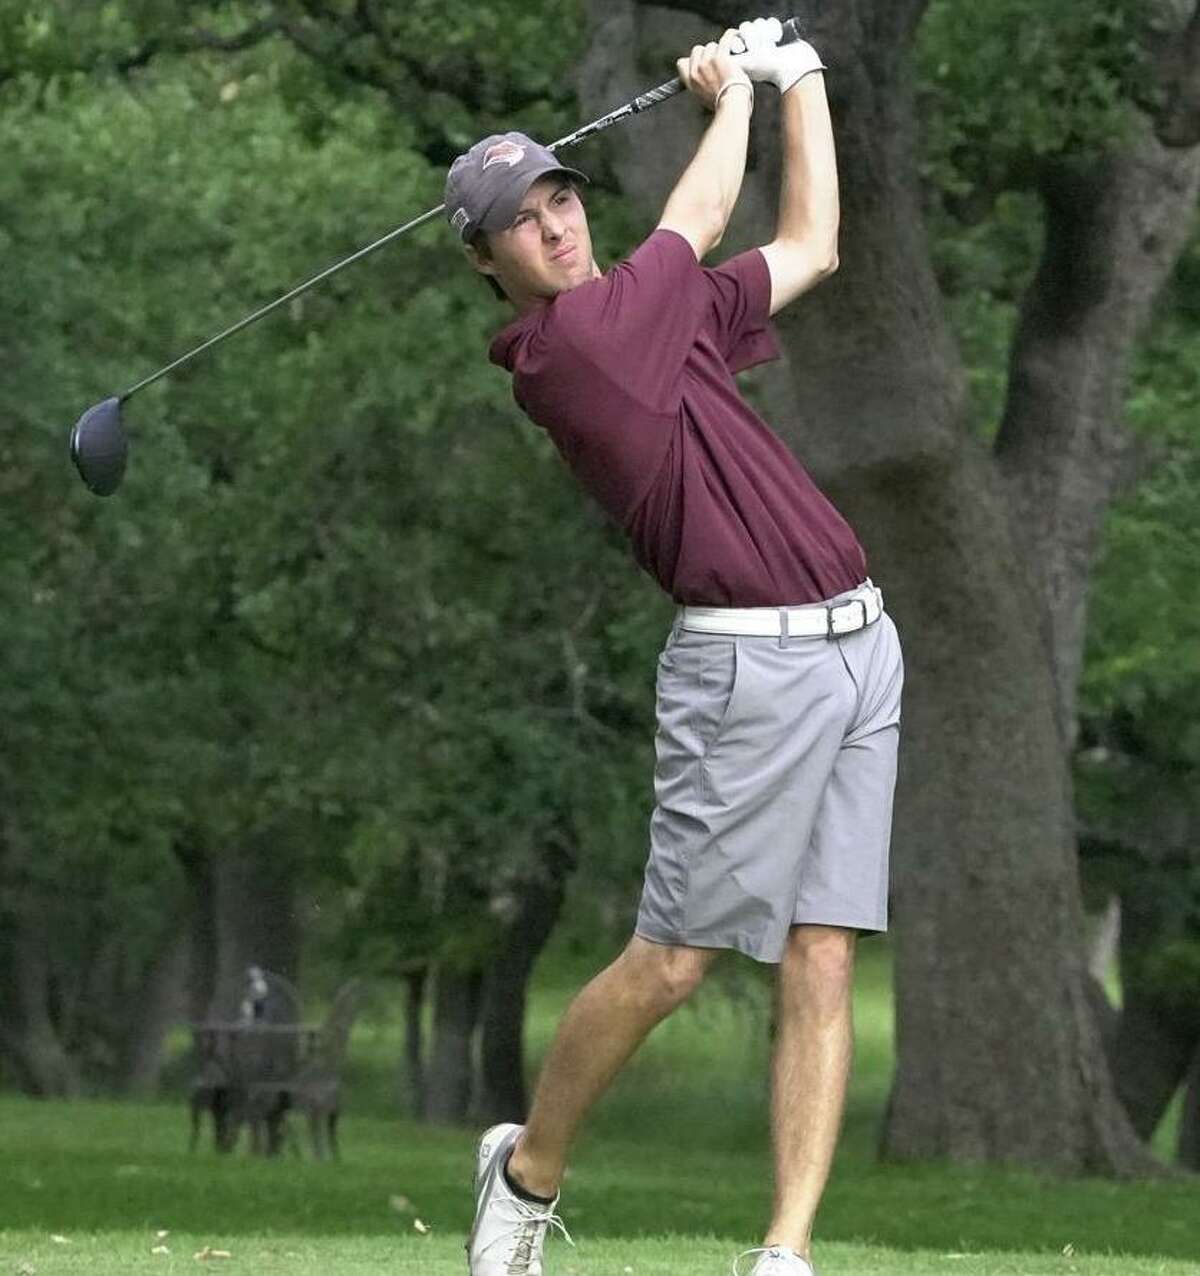 TAMIU’s Parker Holekamp shot a 10-over 150 (73-77) in two rounds at the 119th U.S. Amateur in Village of Pinehurst, North Carolina.